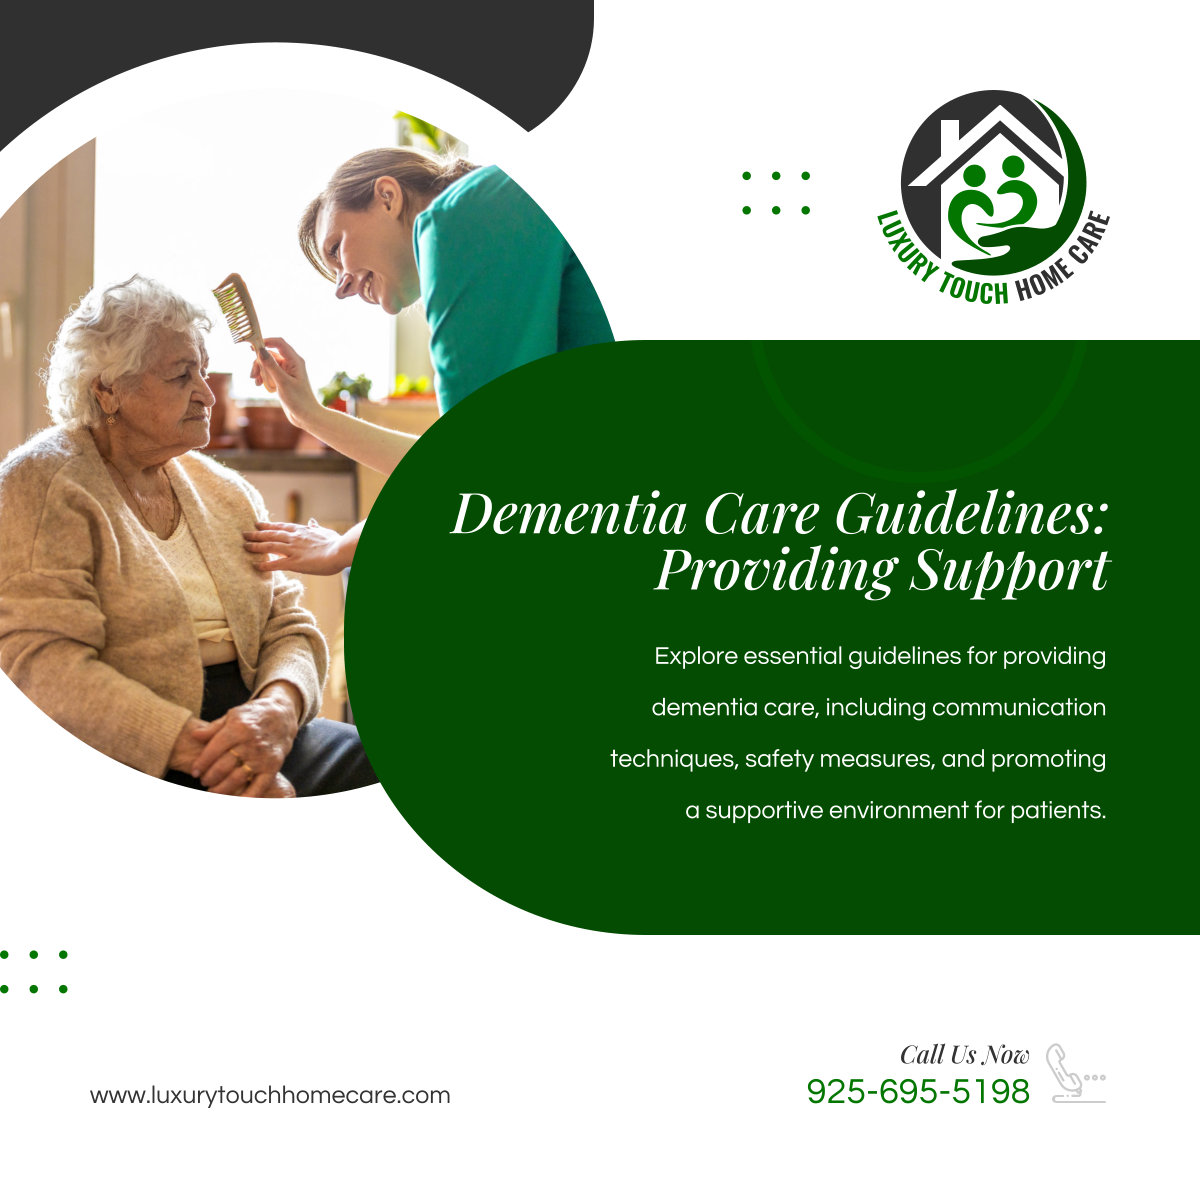 Providing dementia care requires specialized knowledge and compassionate support. Learn more about our dementia care guidelines here: tinyurl.com/ynzrkwb4. 

#DementiaCare #WaterfordCA #HomeCareServices